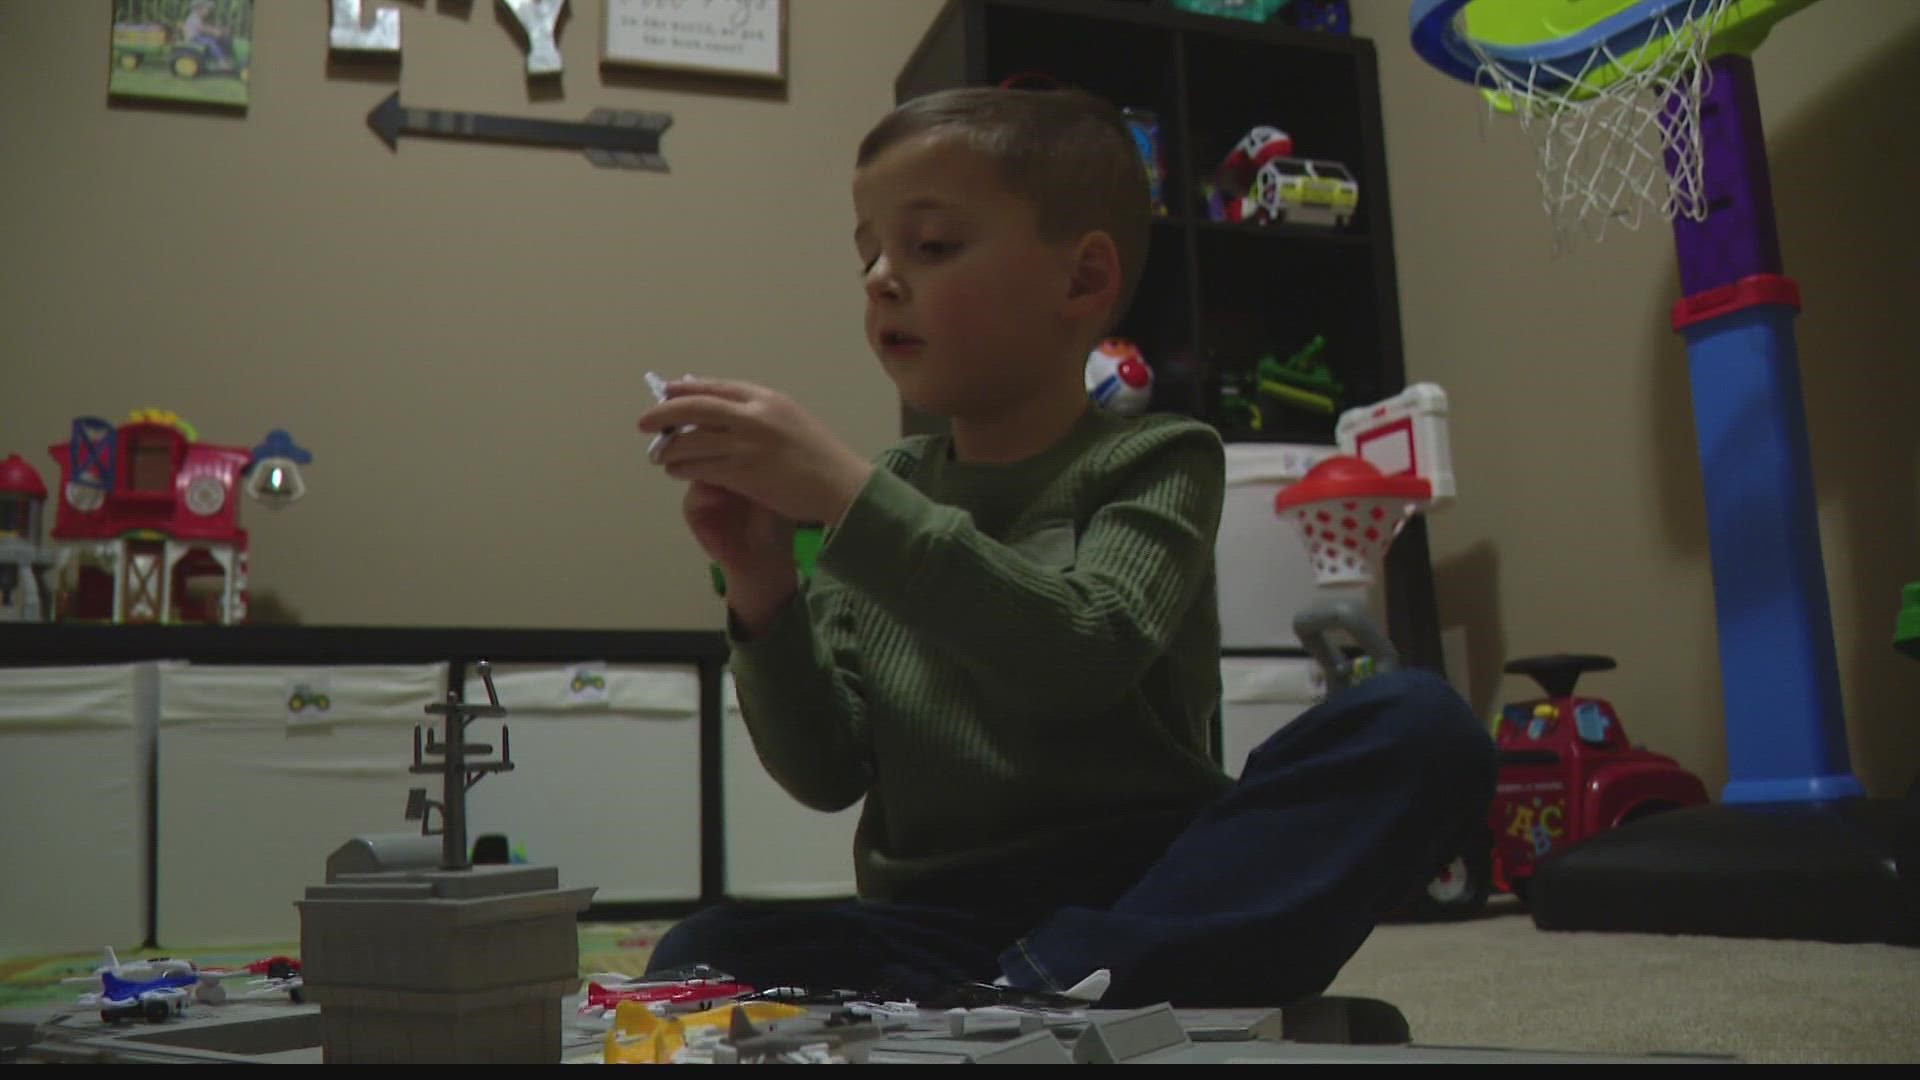 A 5-year-old boy is dedicating the entire month of January to give back to kids in his community. Now his simple act of kindness is taking off.